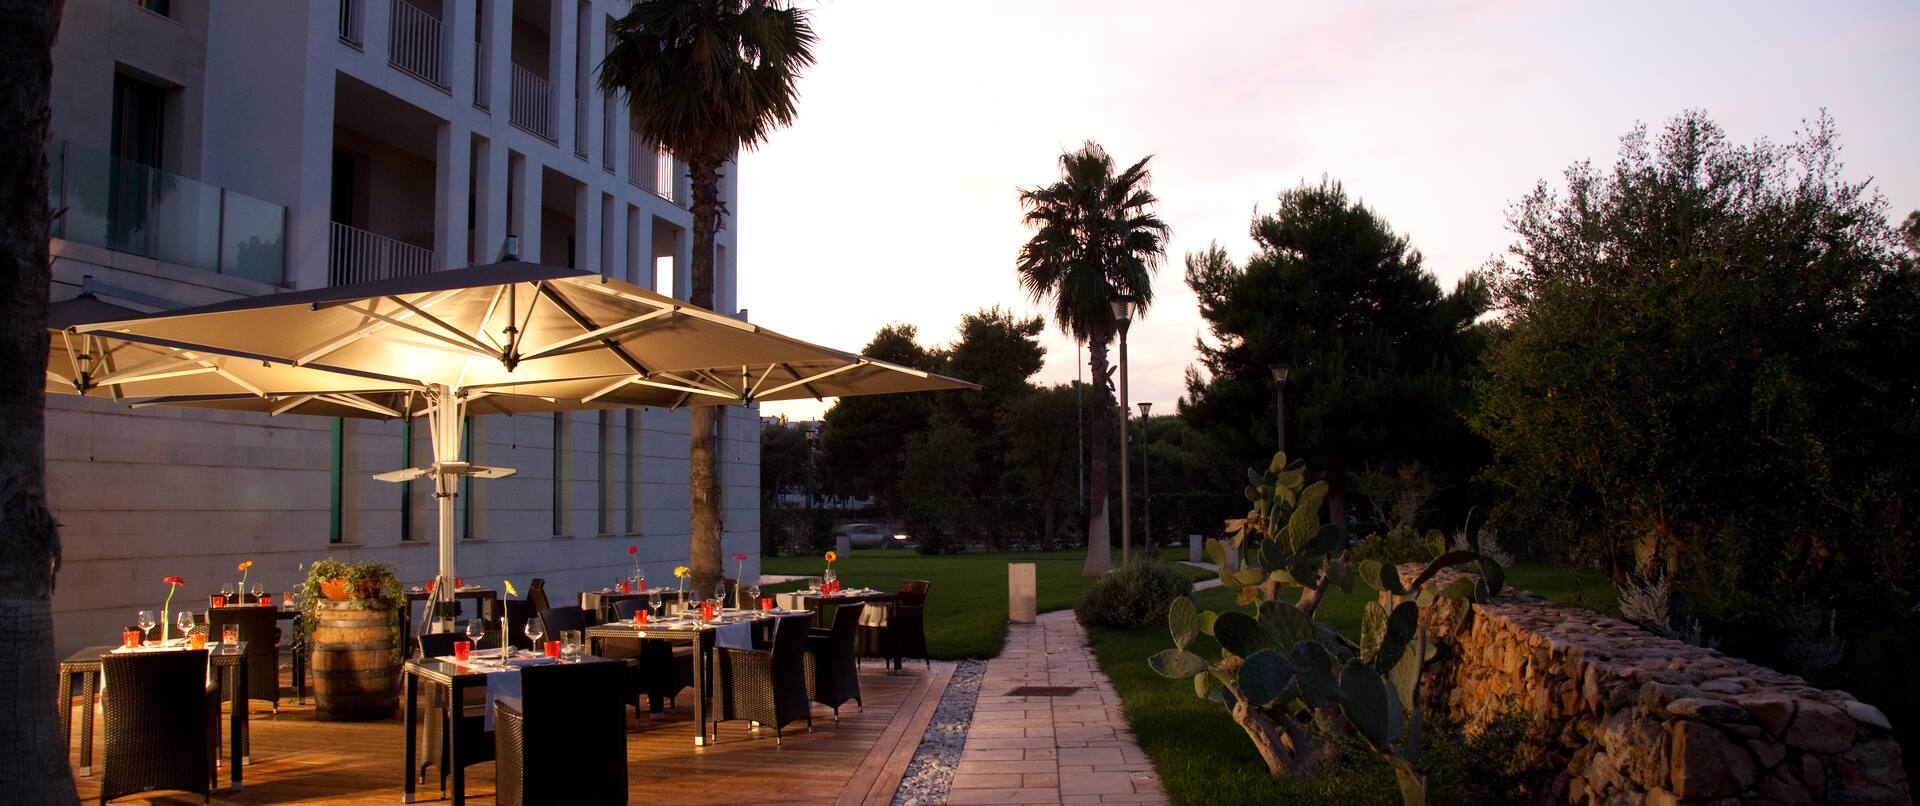 Outside Courtyard With Seating Under Illuminated Umbrellas Surrounded by Palm Trees at Dusk